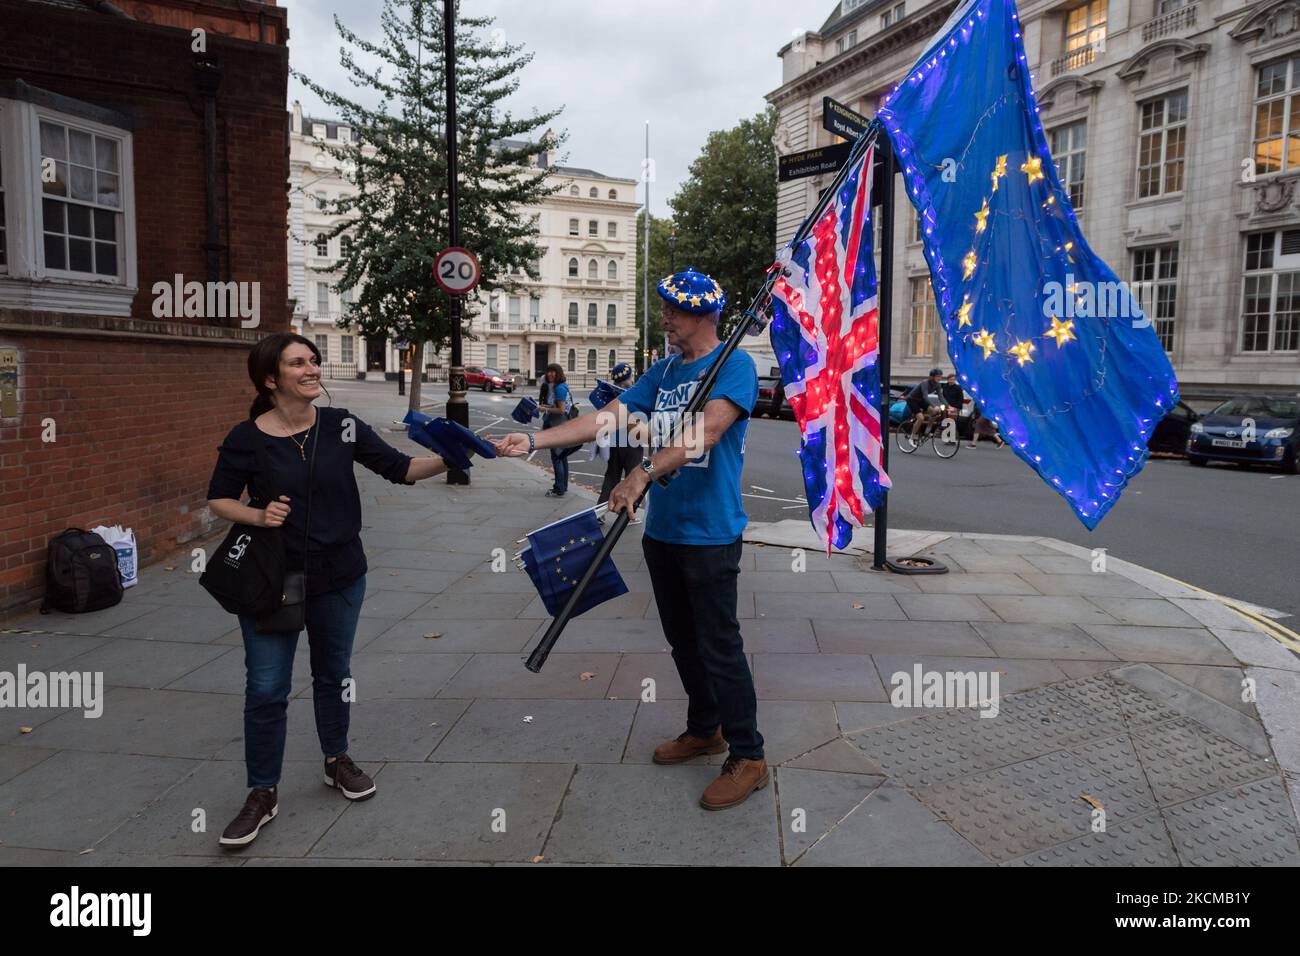 LONDON, UNITED KINGDOM - SEPTEMBER 11, 2021: Pro-EU activists hand out flags to concert-goers outside Royal Albert Hall ahead of the Last Night of the Proms to highlight lack of post-Brexit agreement for touring arts on September 11, 2021 in London, England. The campaigners call for the government to introduce a transitional support package to cover the additional post-Brexit expenses before securing an EU-wide touring artists visa waiver. (Photo by WIktor Szymanowicz/NurPhoto) Stock Photo